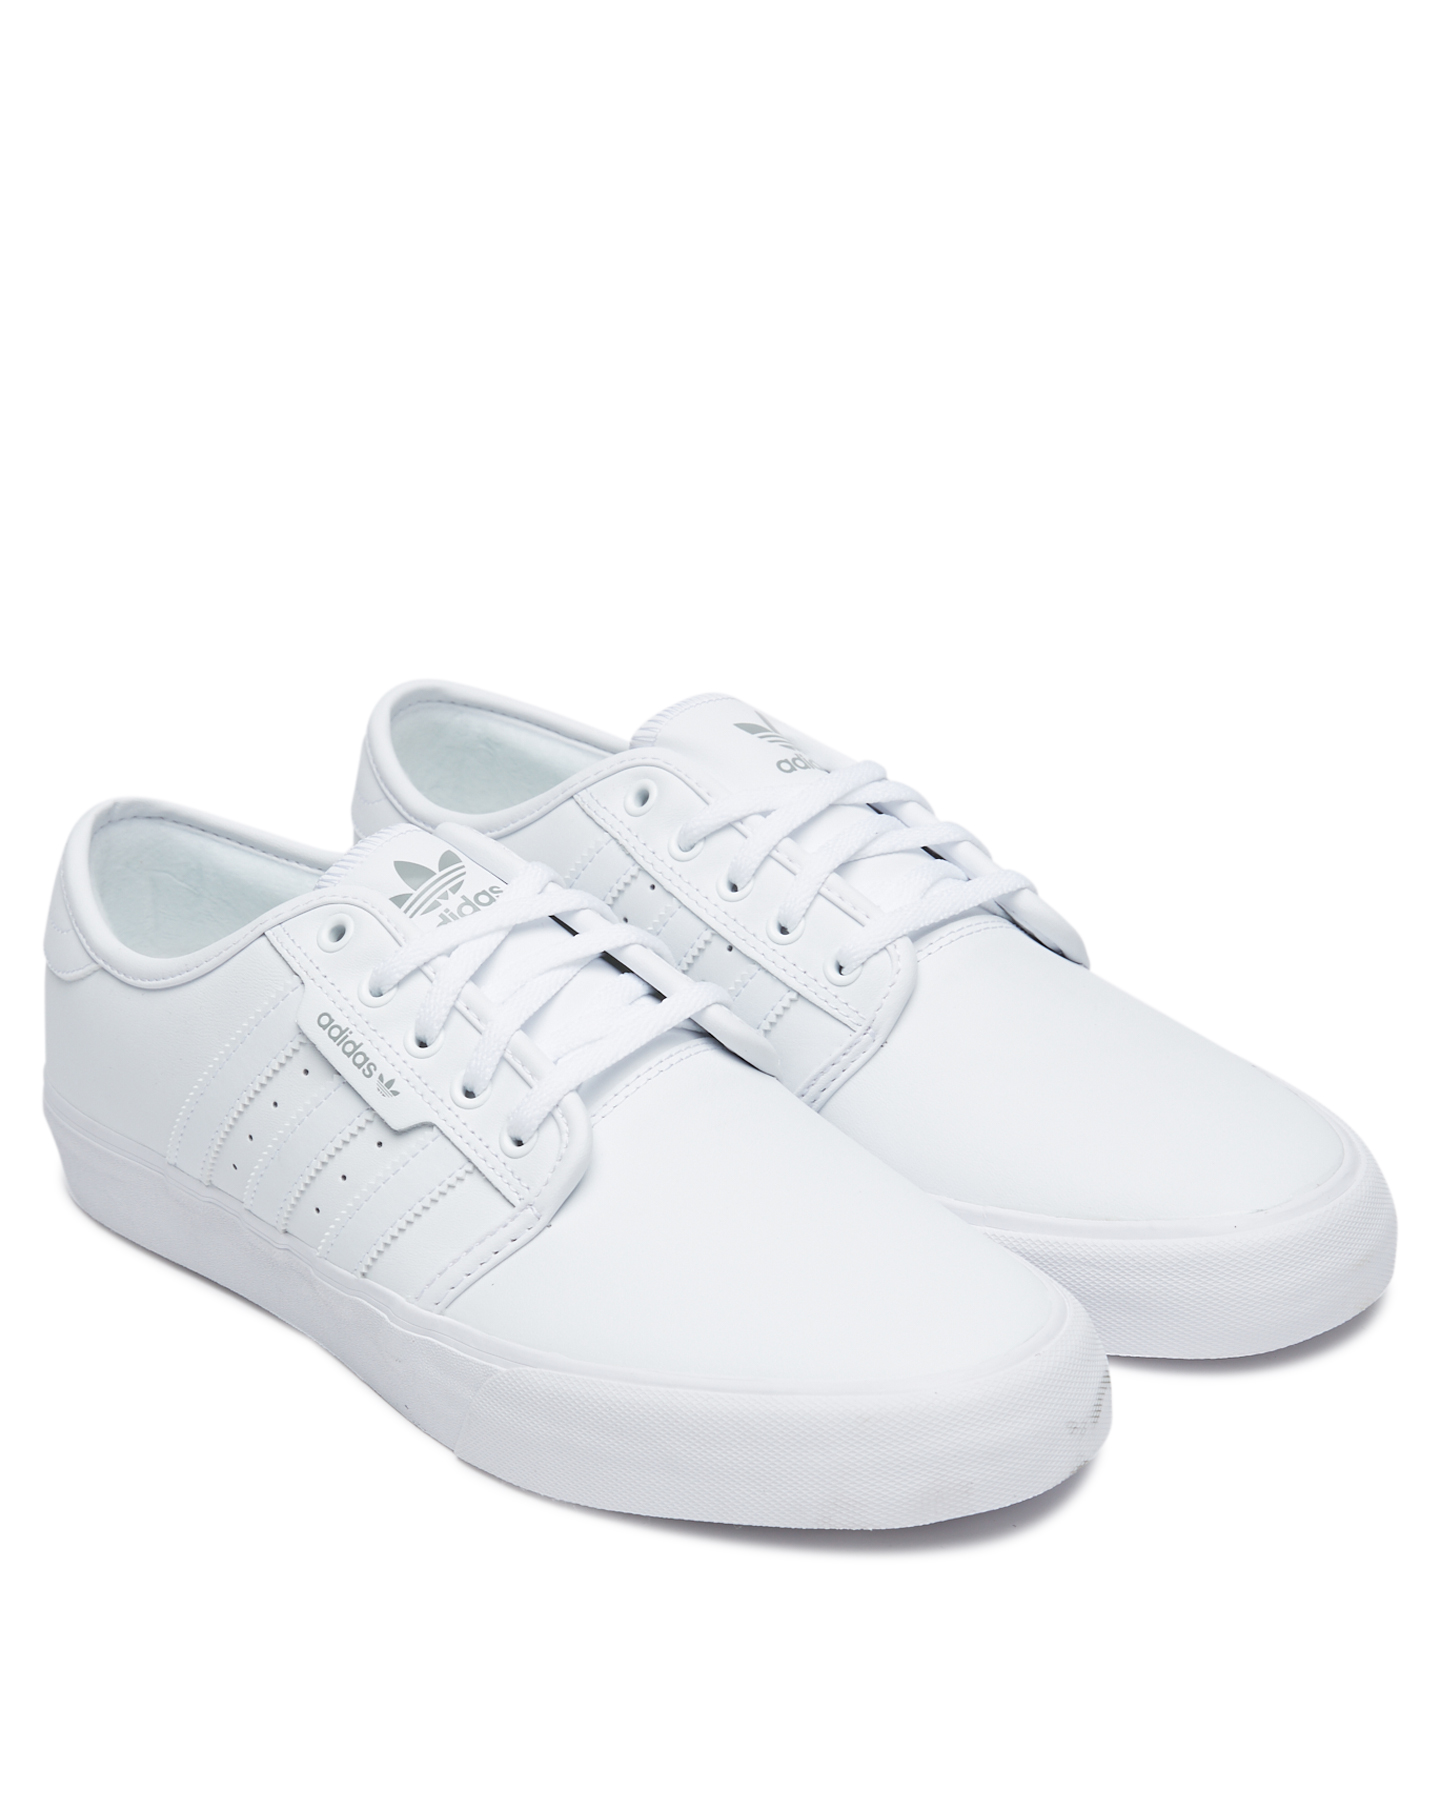 Adidas Mens Seeley Xt Leather Shoe - White | SurfStitch